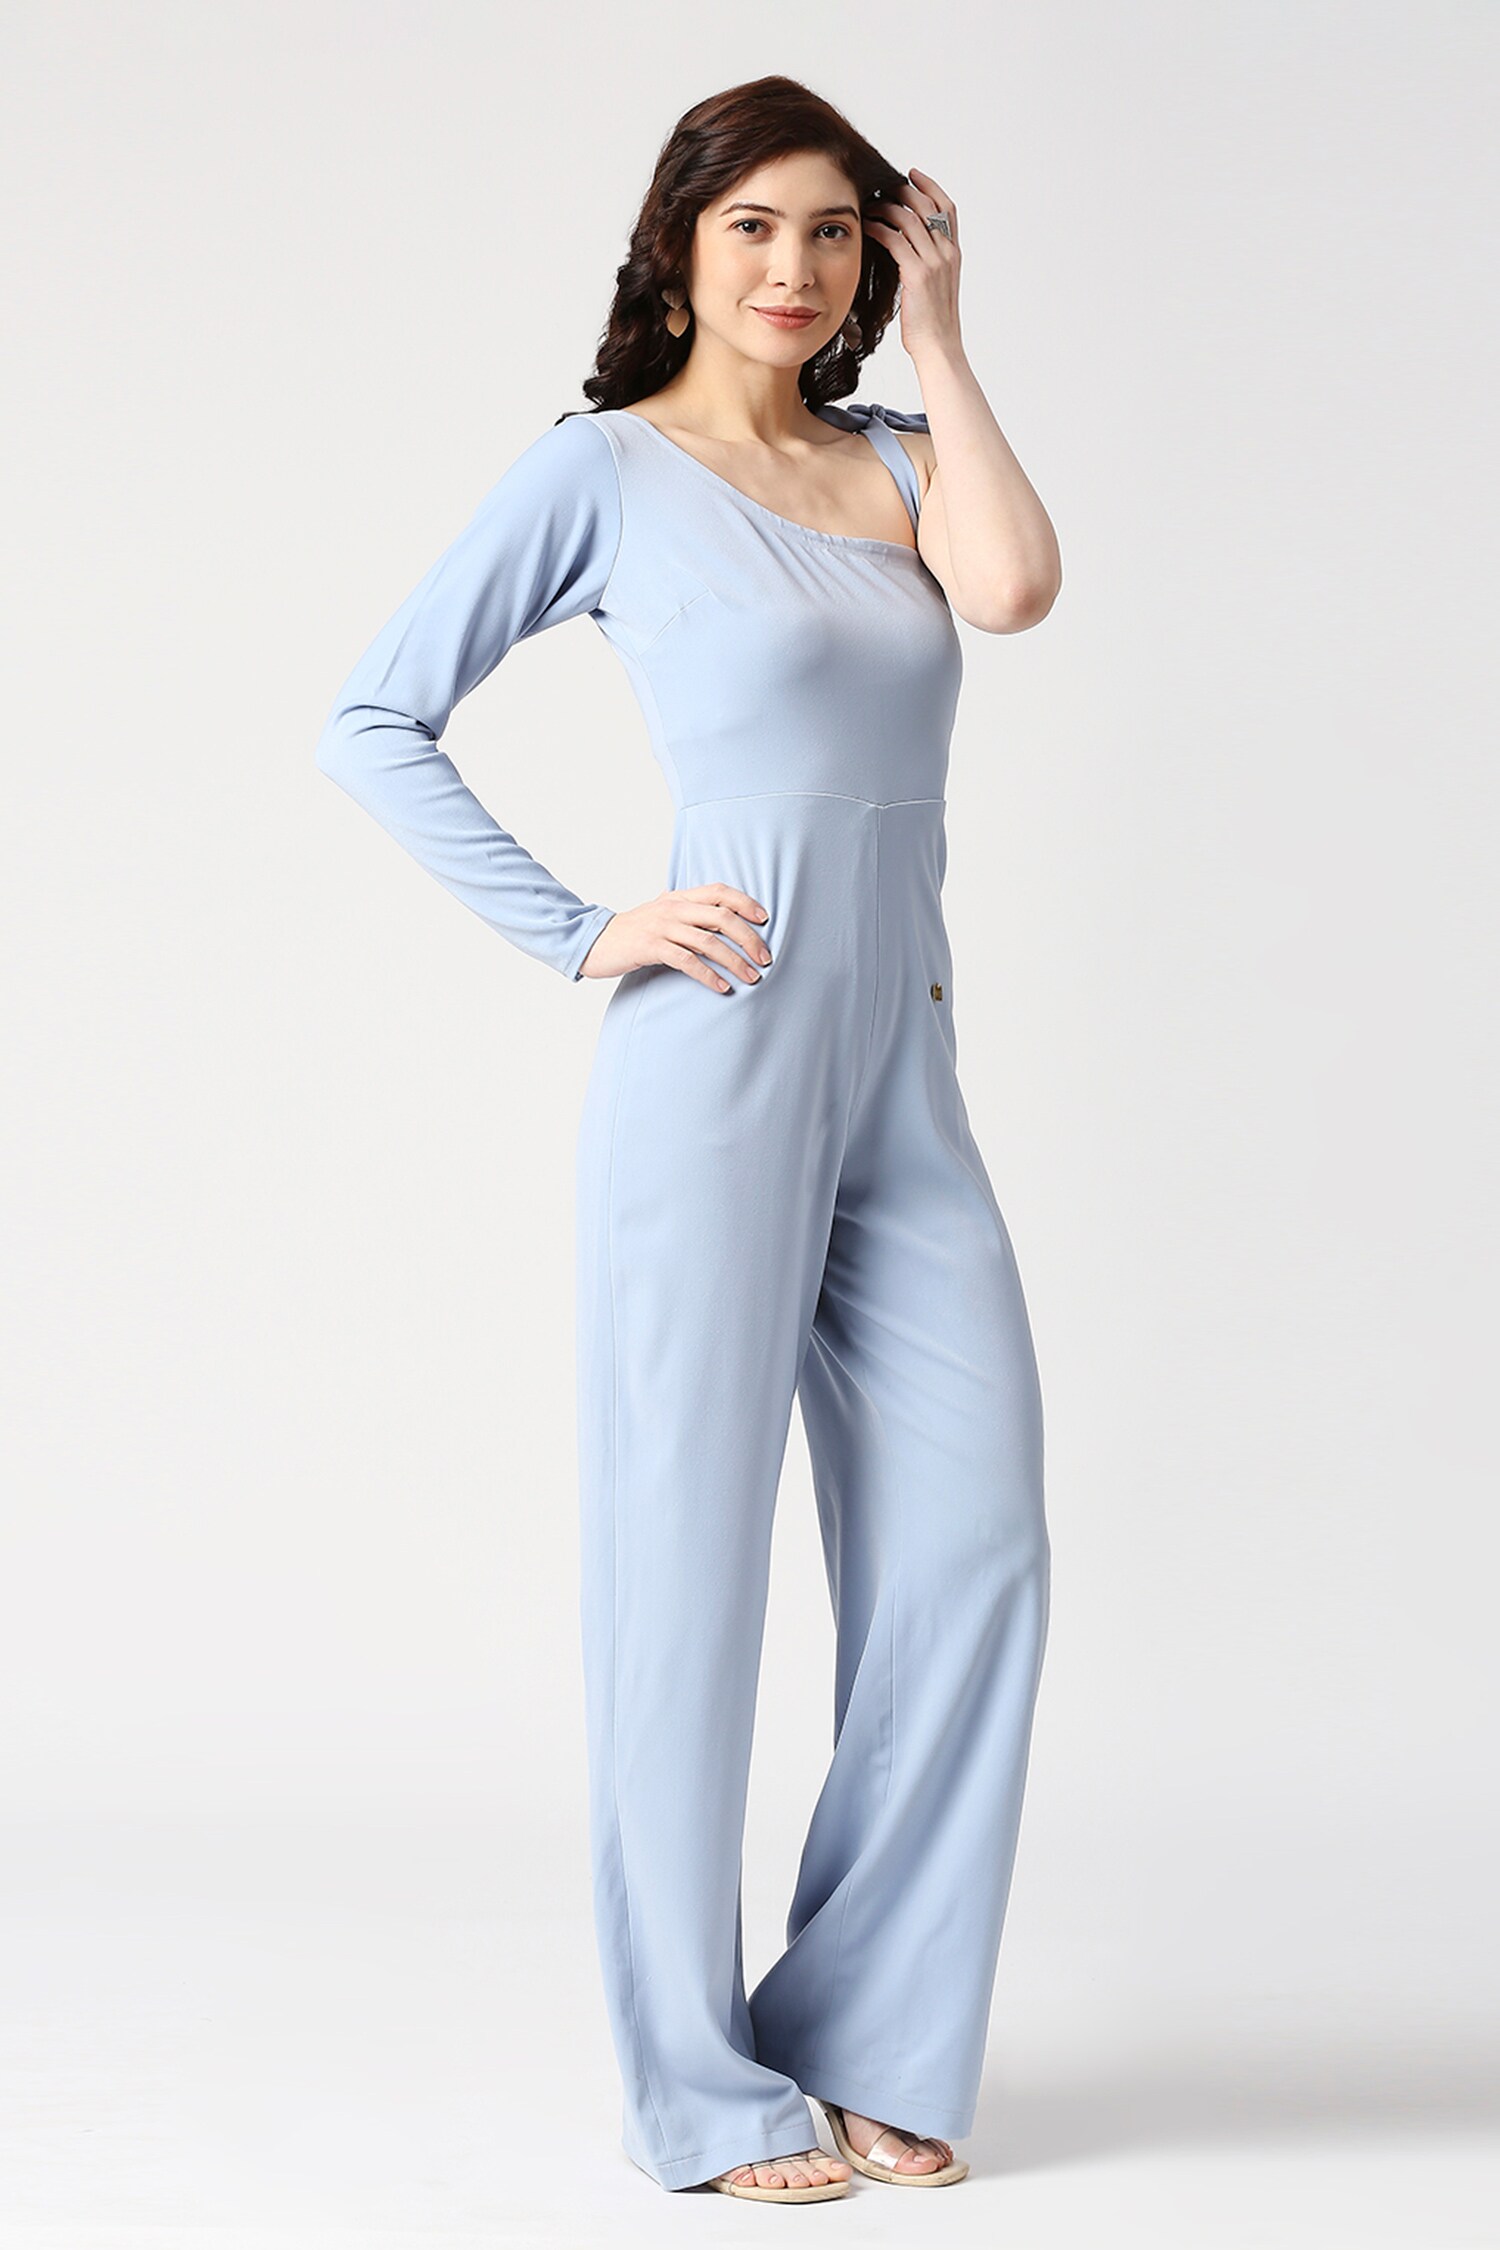 Long Sleeve Yoga Harem Jumpsuit - Yoga Clothing by Daughters of Culture